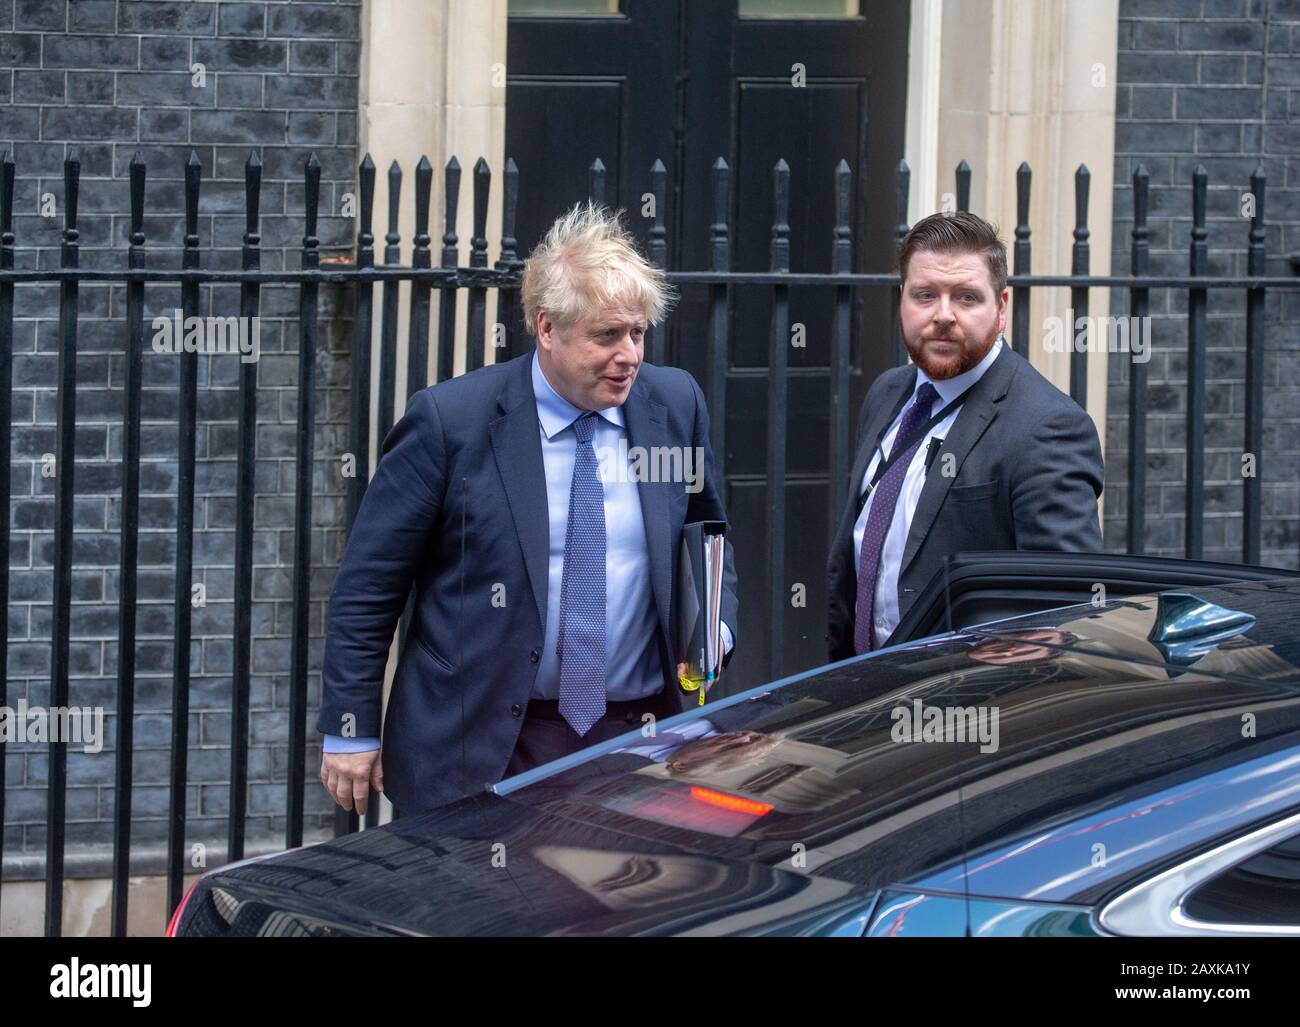 London, UK. 12th Feb, 2020. British Prime Minister, Boris Johnson, leaves Number 10 Downing Street to go to the House of Commons for Prime Minister's Questions. He will be facing questions from the Opposition about his announcement to go ahead with the High Speed Rail project, known as HS2. Credit: Tommy London/Alamy Live News Stock Photo